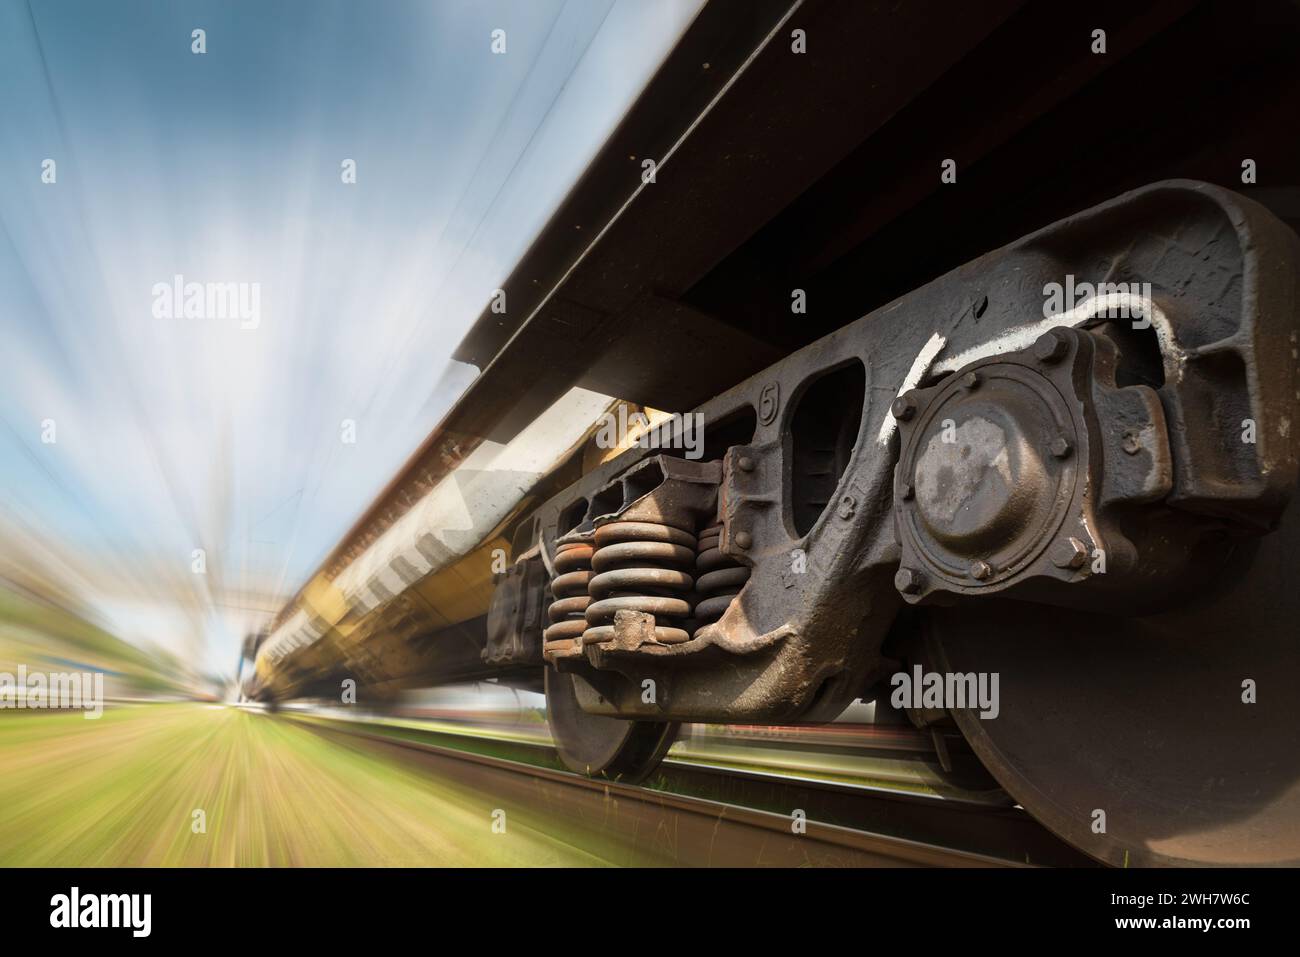 Freight train on the railroad. Industrial landscape of a freight train traveling on a railroad with blurred background. Stock Photo